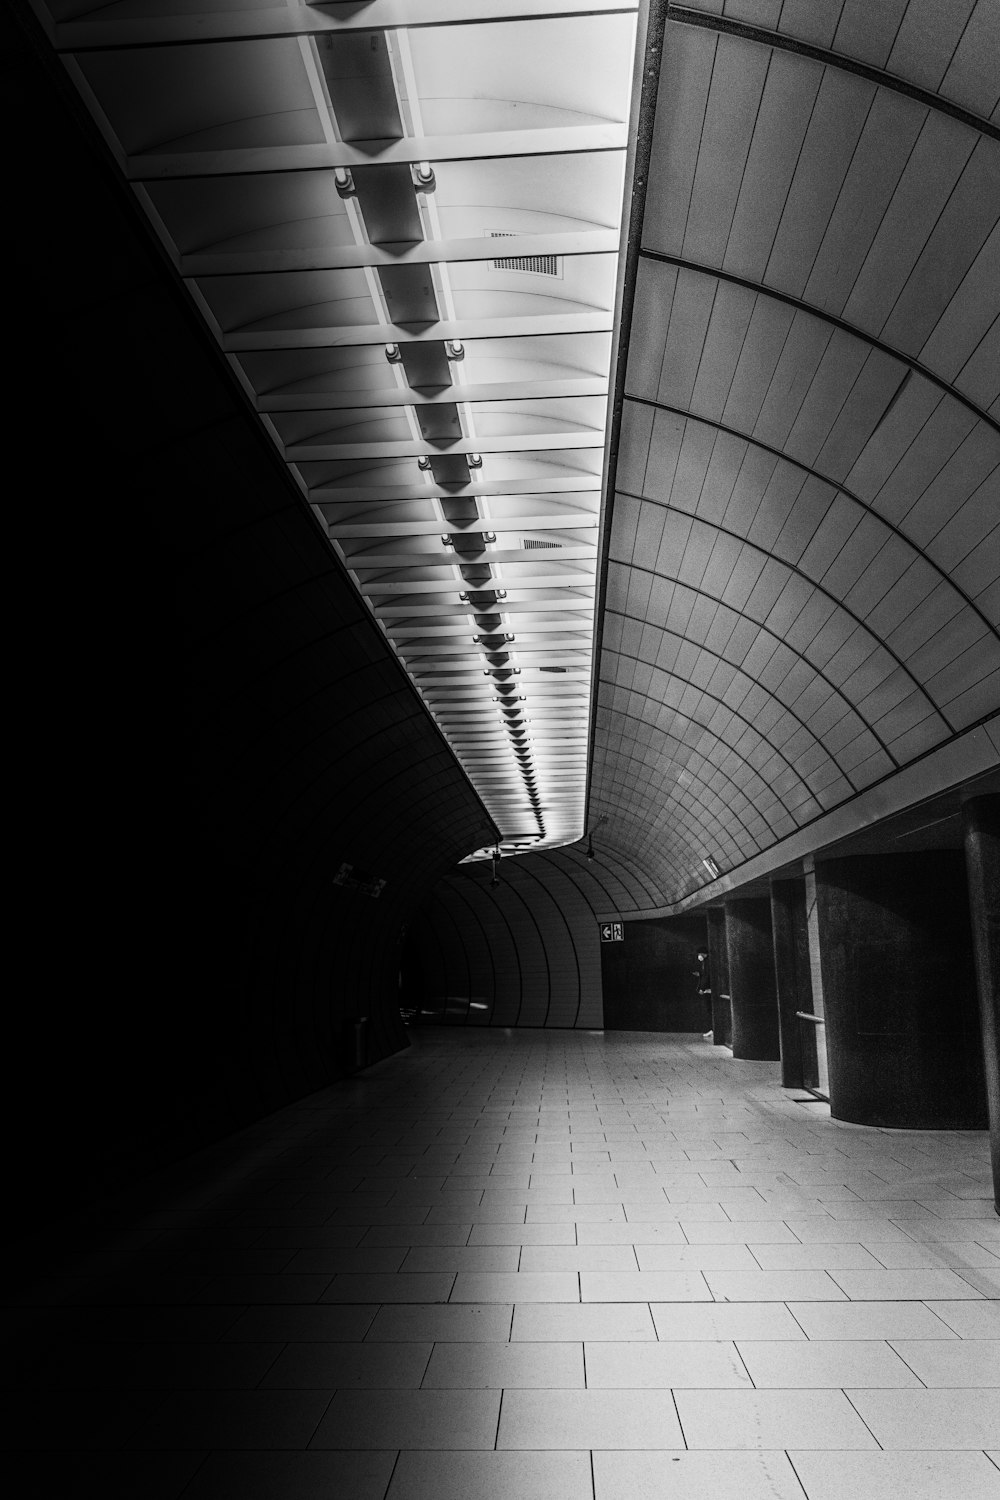 grayscale photo of tunnel with lights